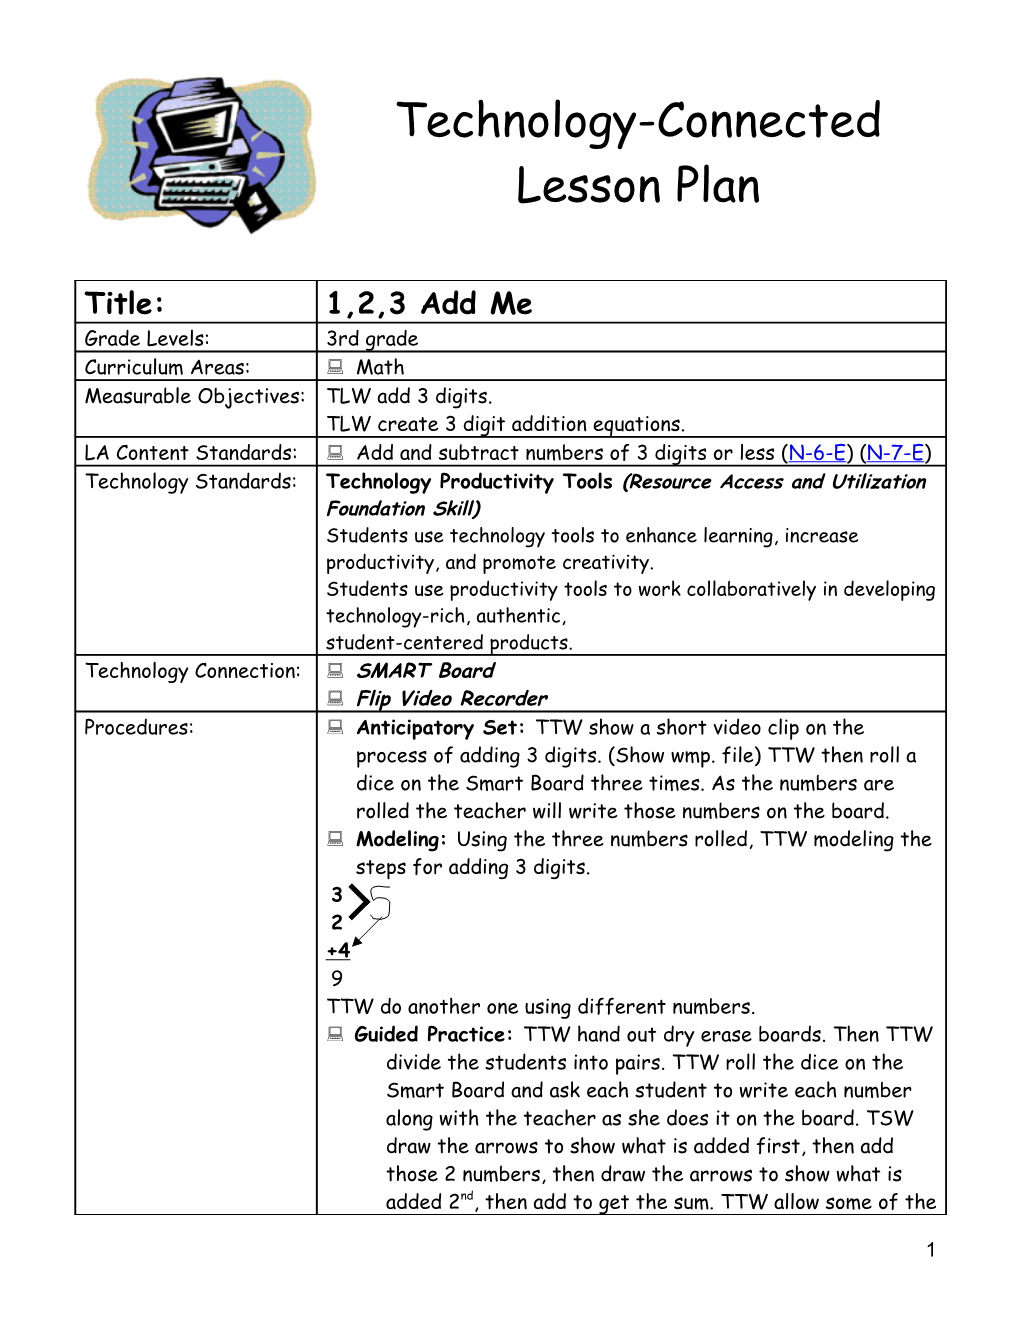 Technology-Connected Lesson Plan s5